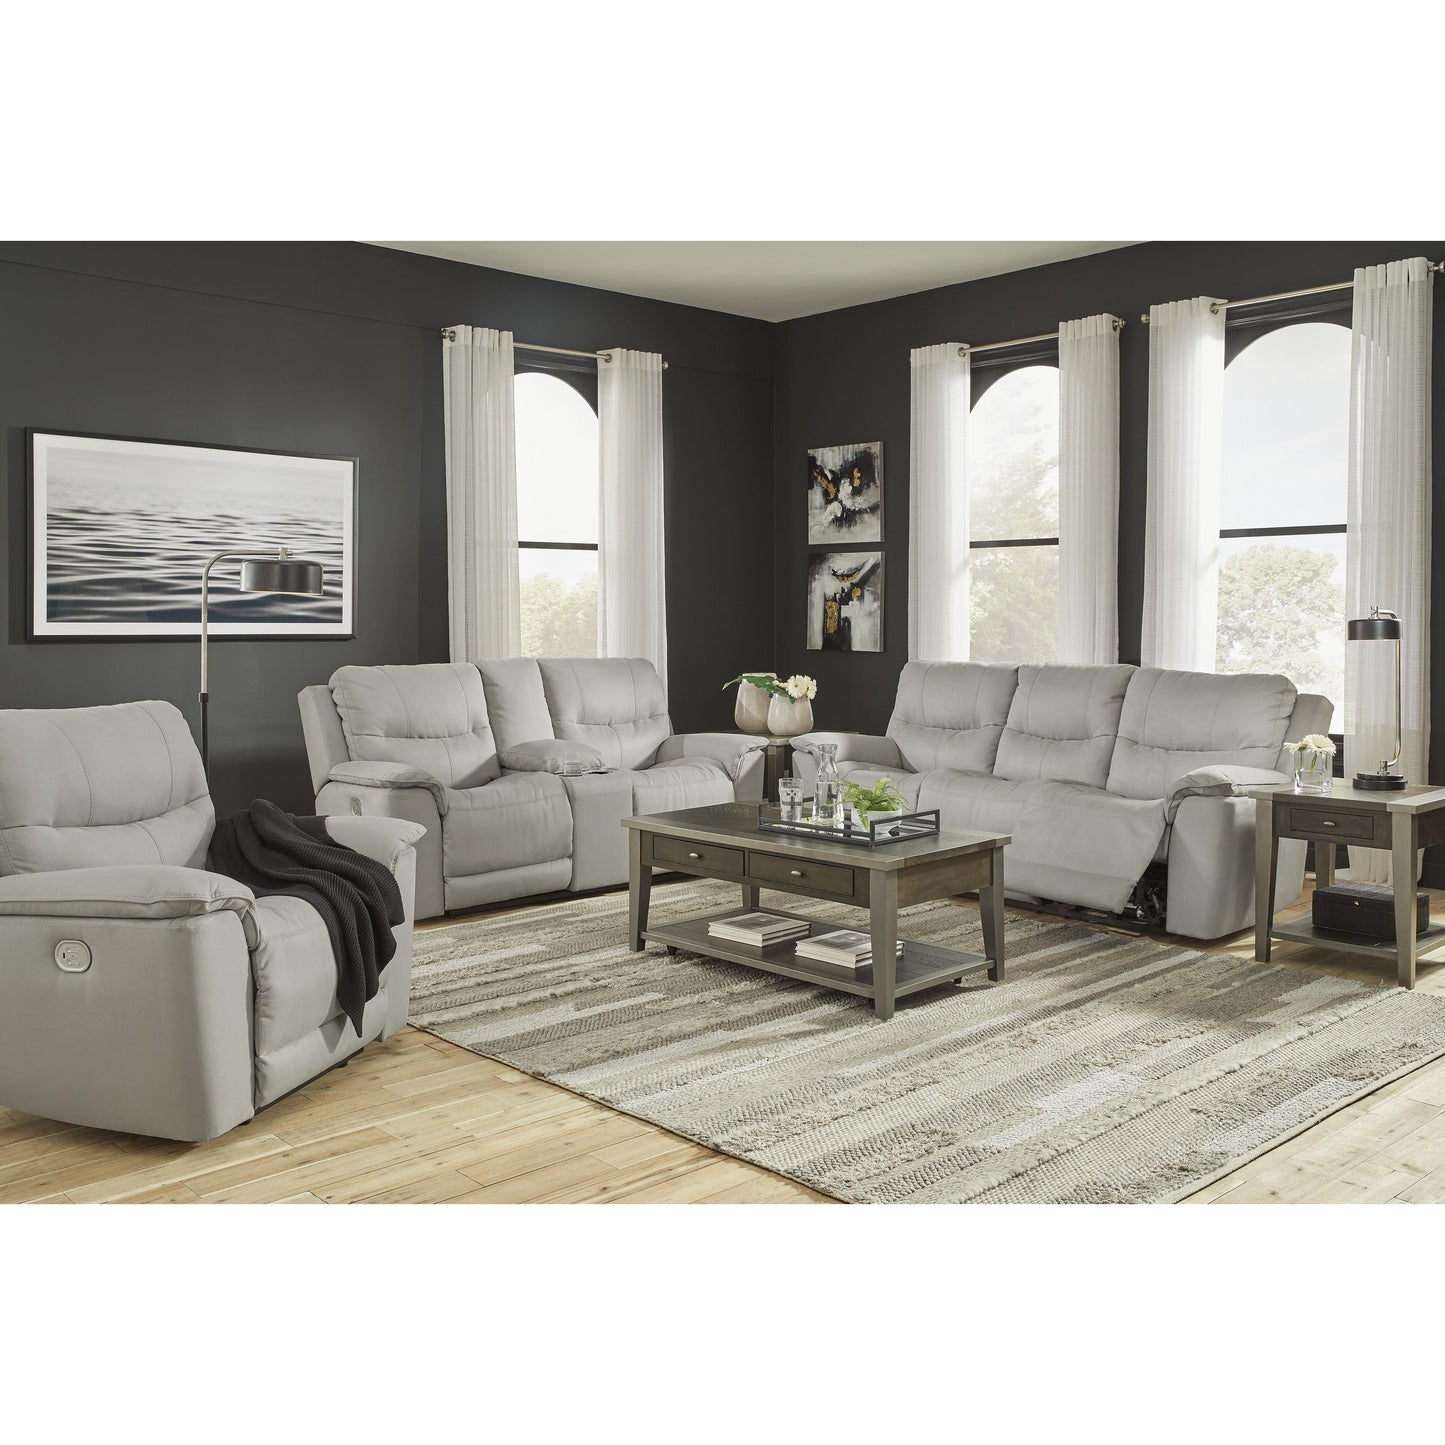 Signature Design by Ashley Next-Gen Gaucho Power Reclining Leather Look Loveseat 6080618 IMAGE 13